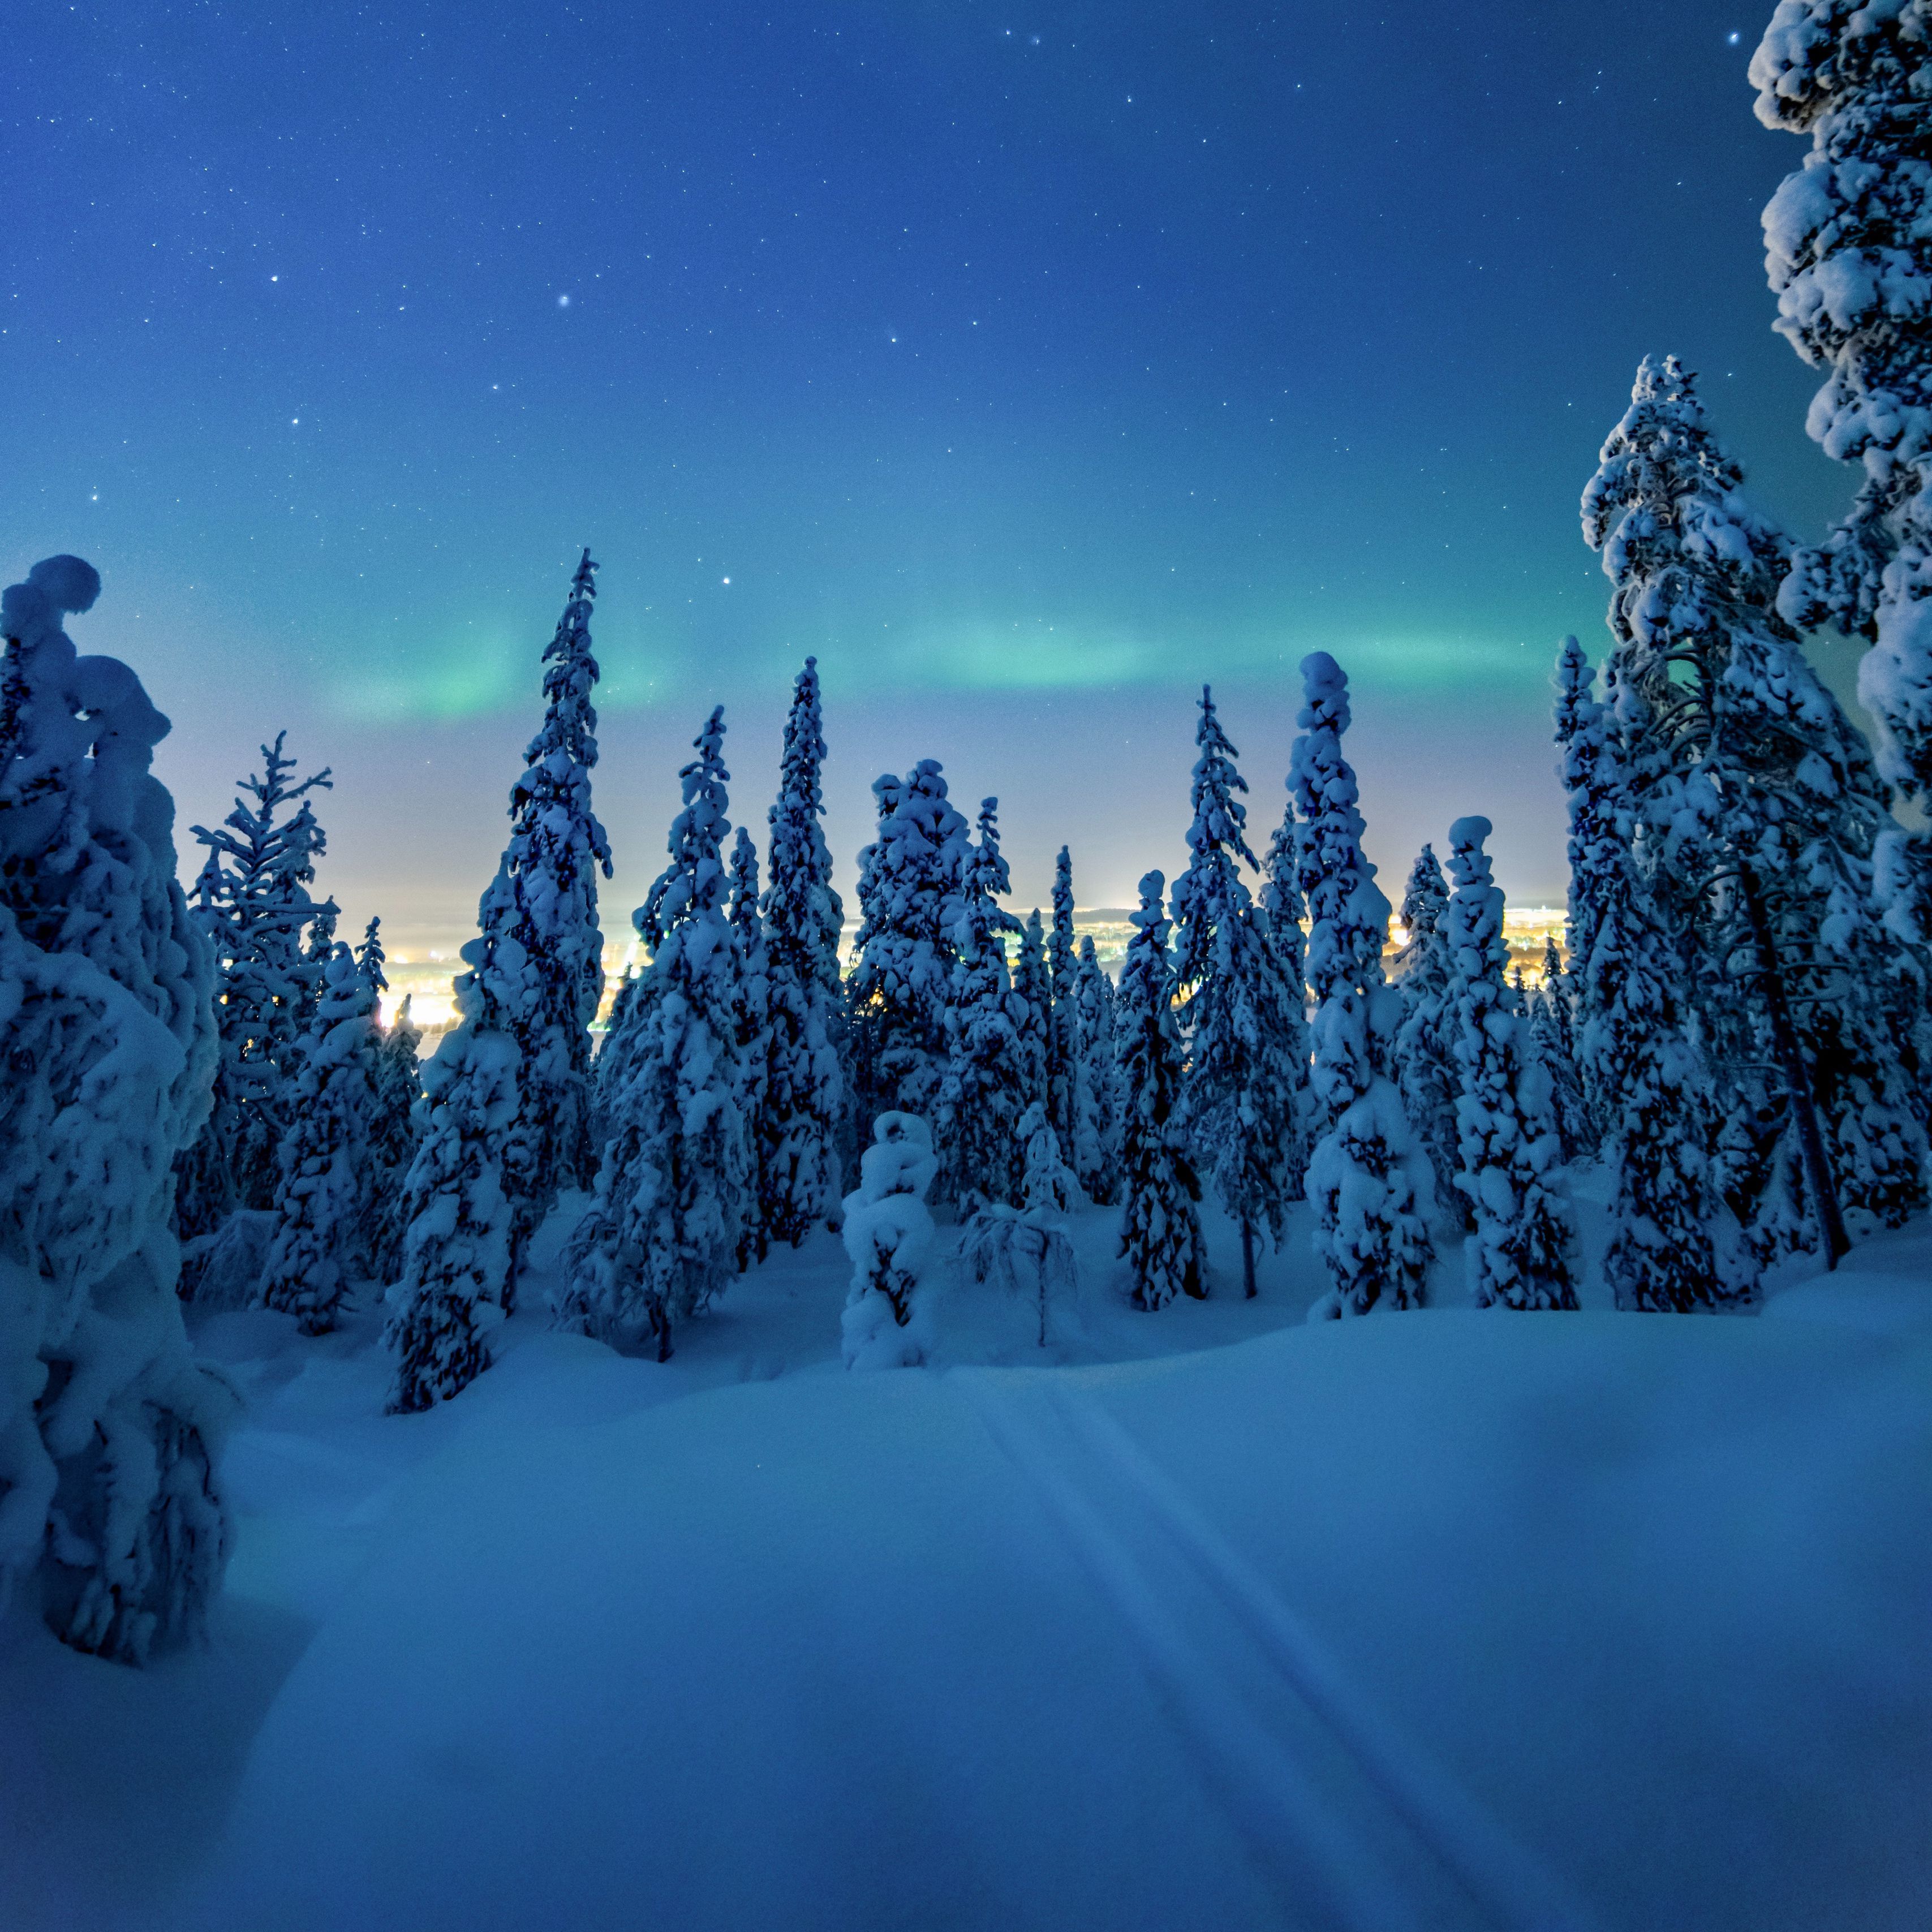 Snowy Winter Night Wallpapers - Wallpaper Cave